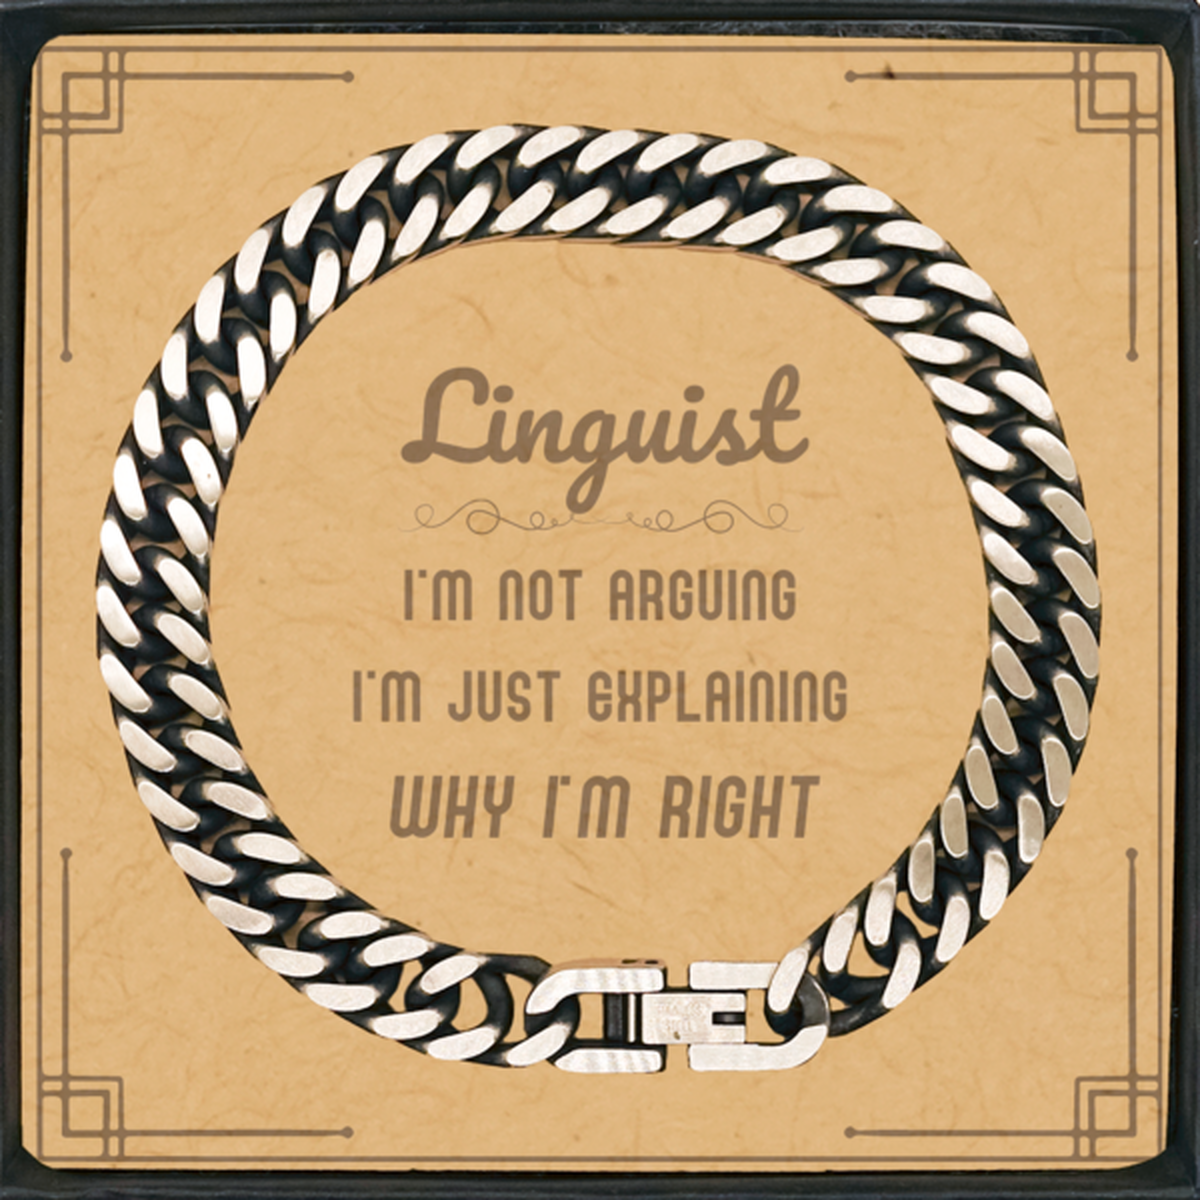 Linguist I'm not Arguing. I'm Just Explaining Why I'm RIGHT Cuban Link Chain Bracelet, Funny Saying Quote Linguist Gifts For Linguist Message Card Graduation Birthday Christmas Gifts for Men Women Coworker